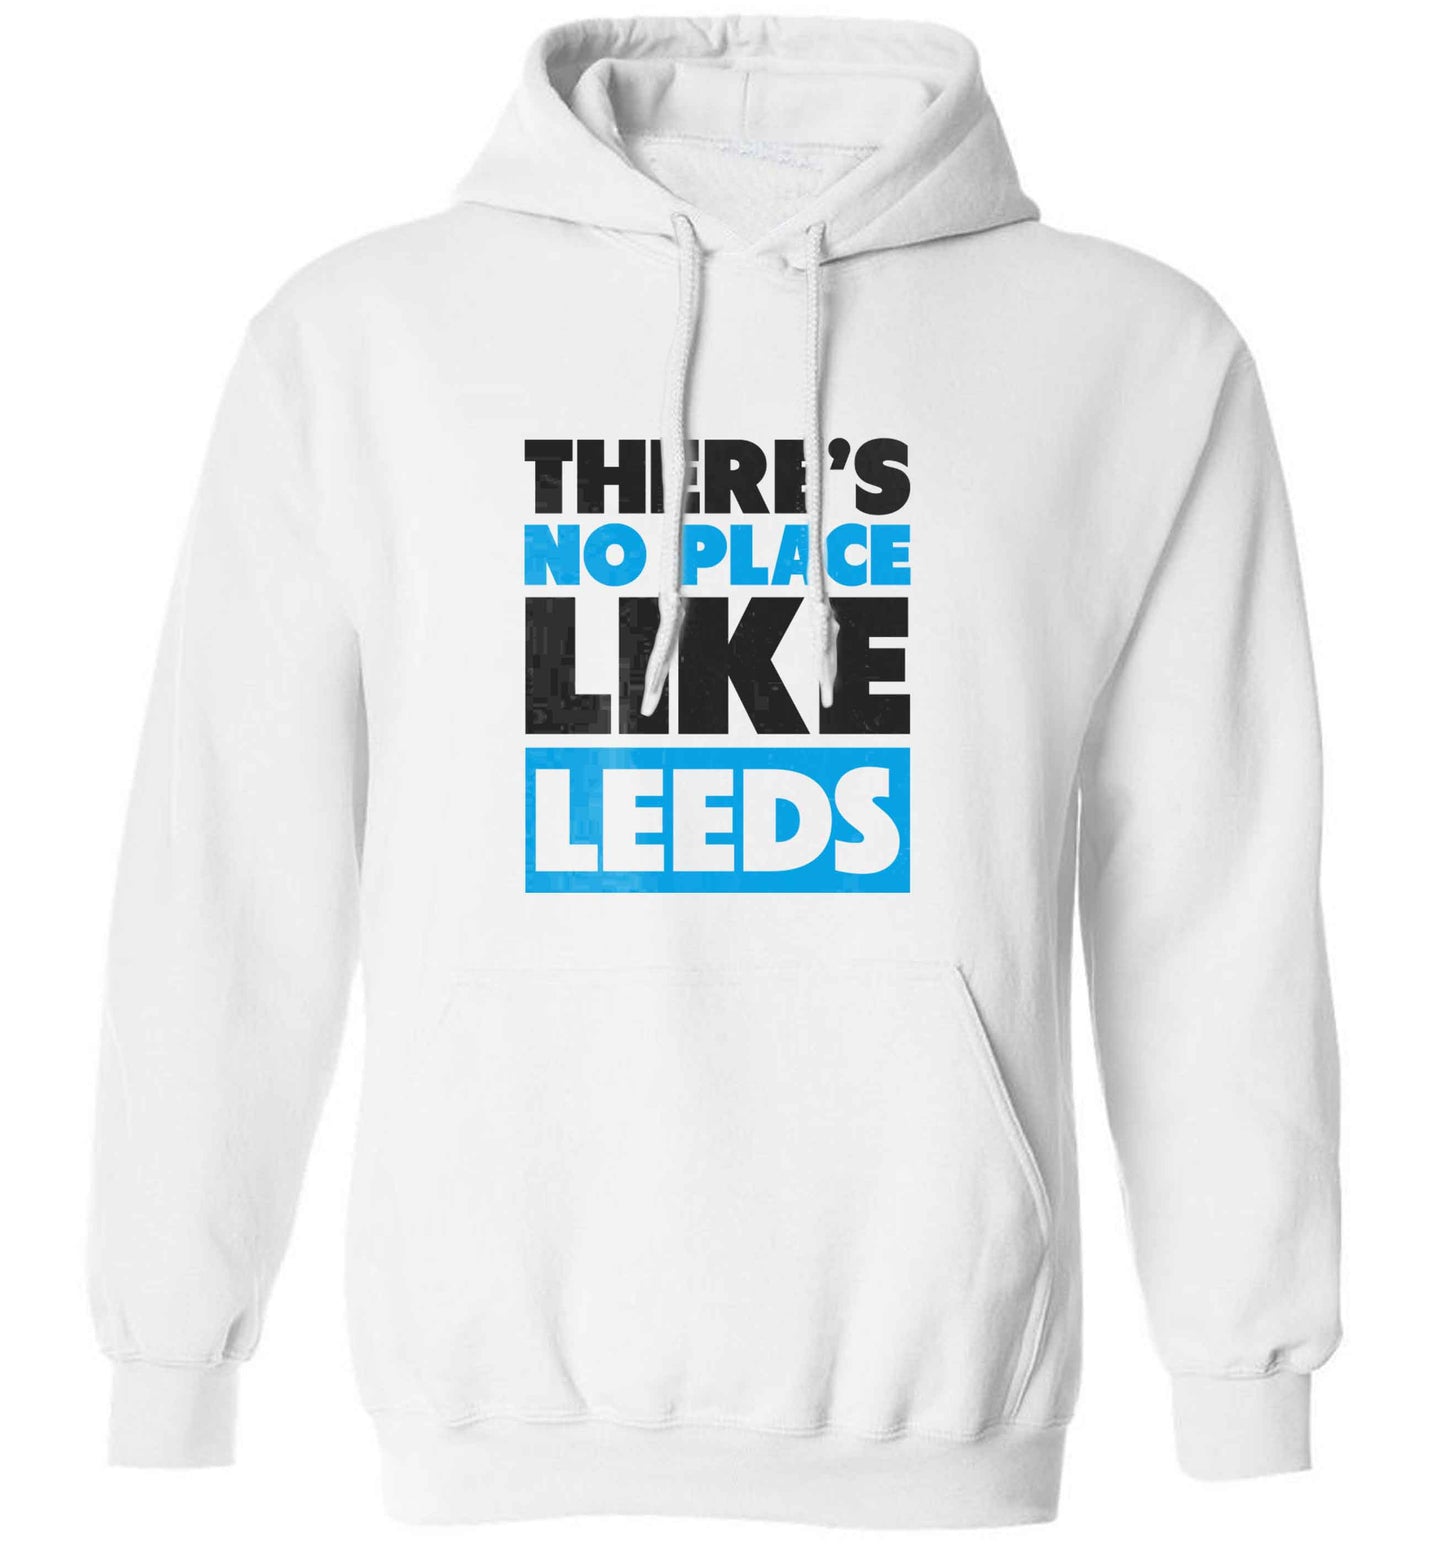 There's no place like Leeds adults unisex white hoodie 2XL